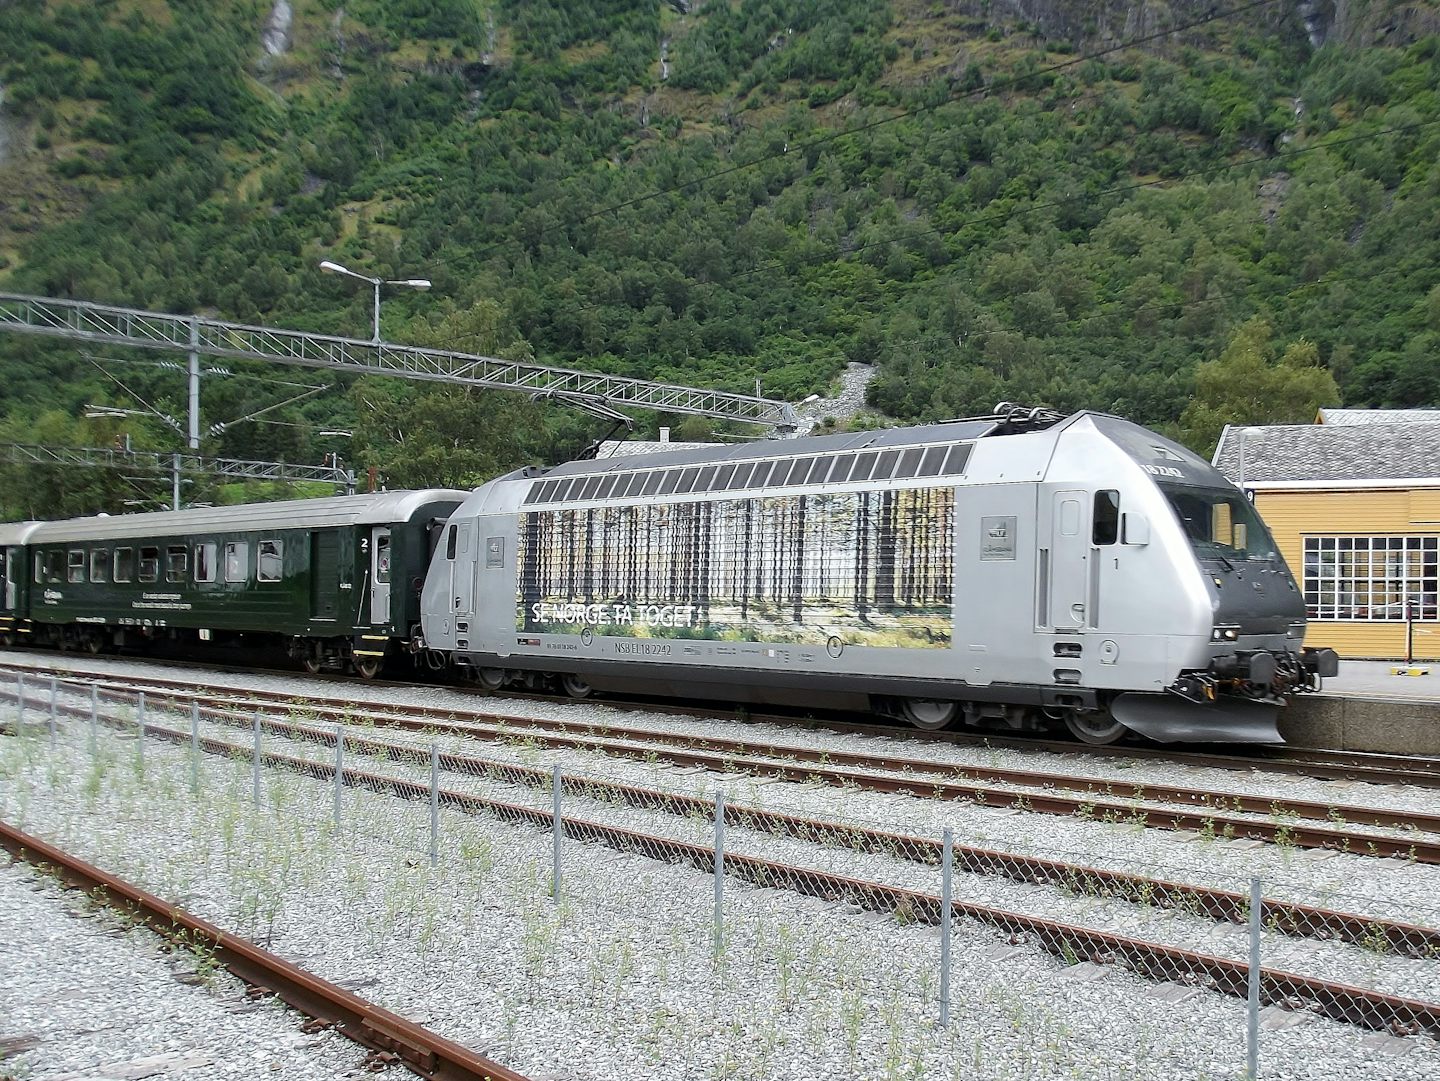 One of the Flamsbana (Flam Railway) trains arriving in Flam.